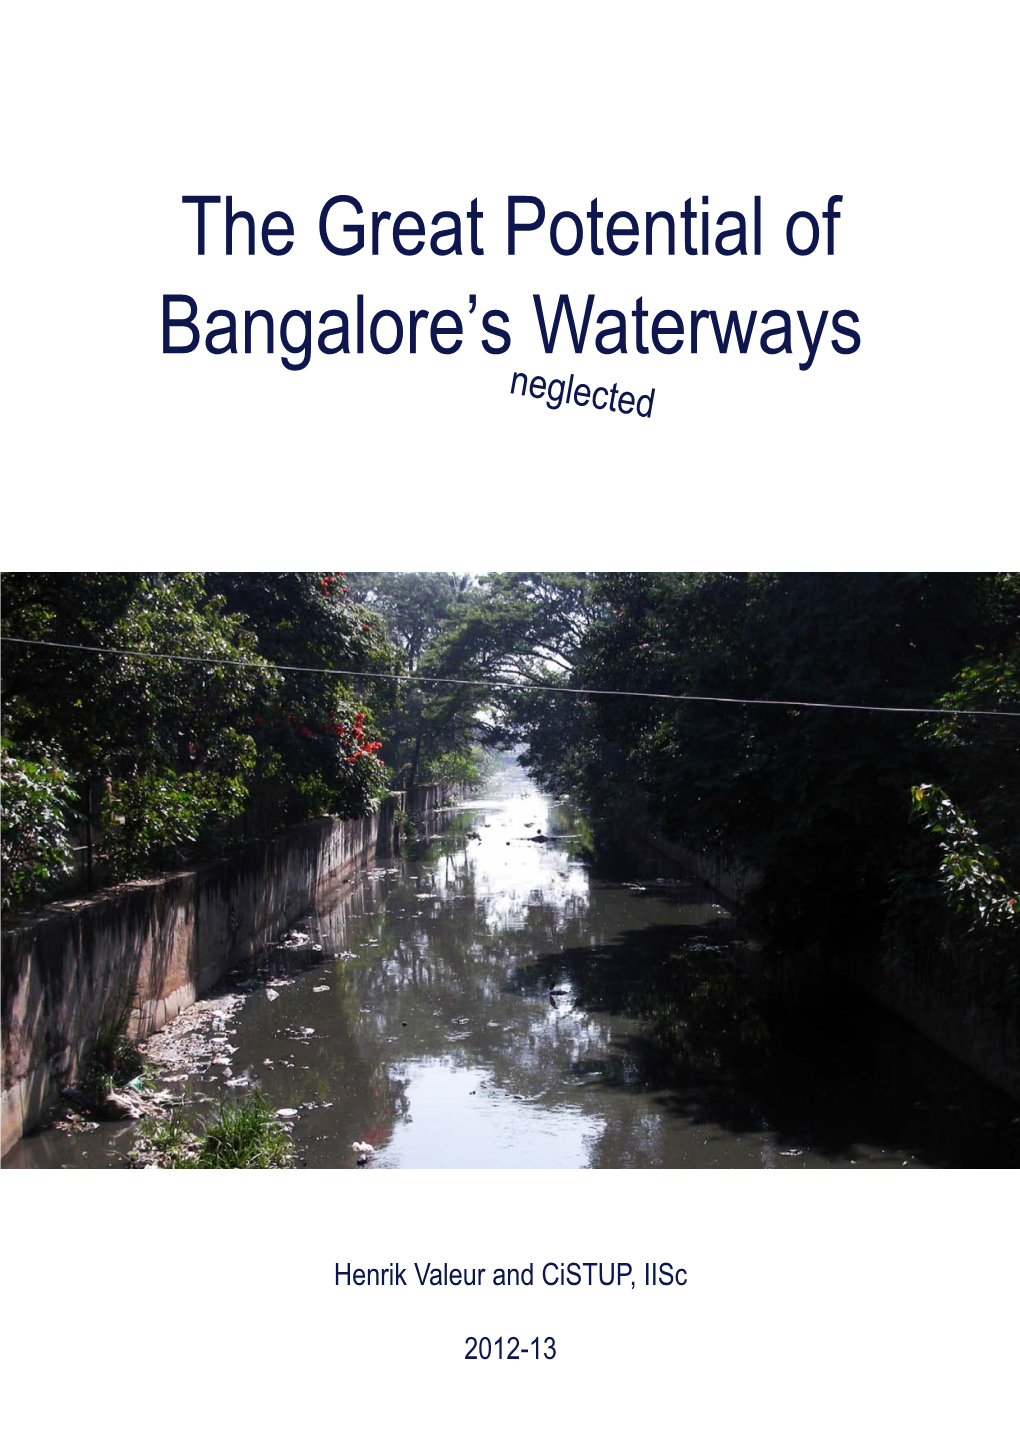 The Great Potential of Bangalore's Waterways